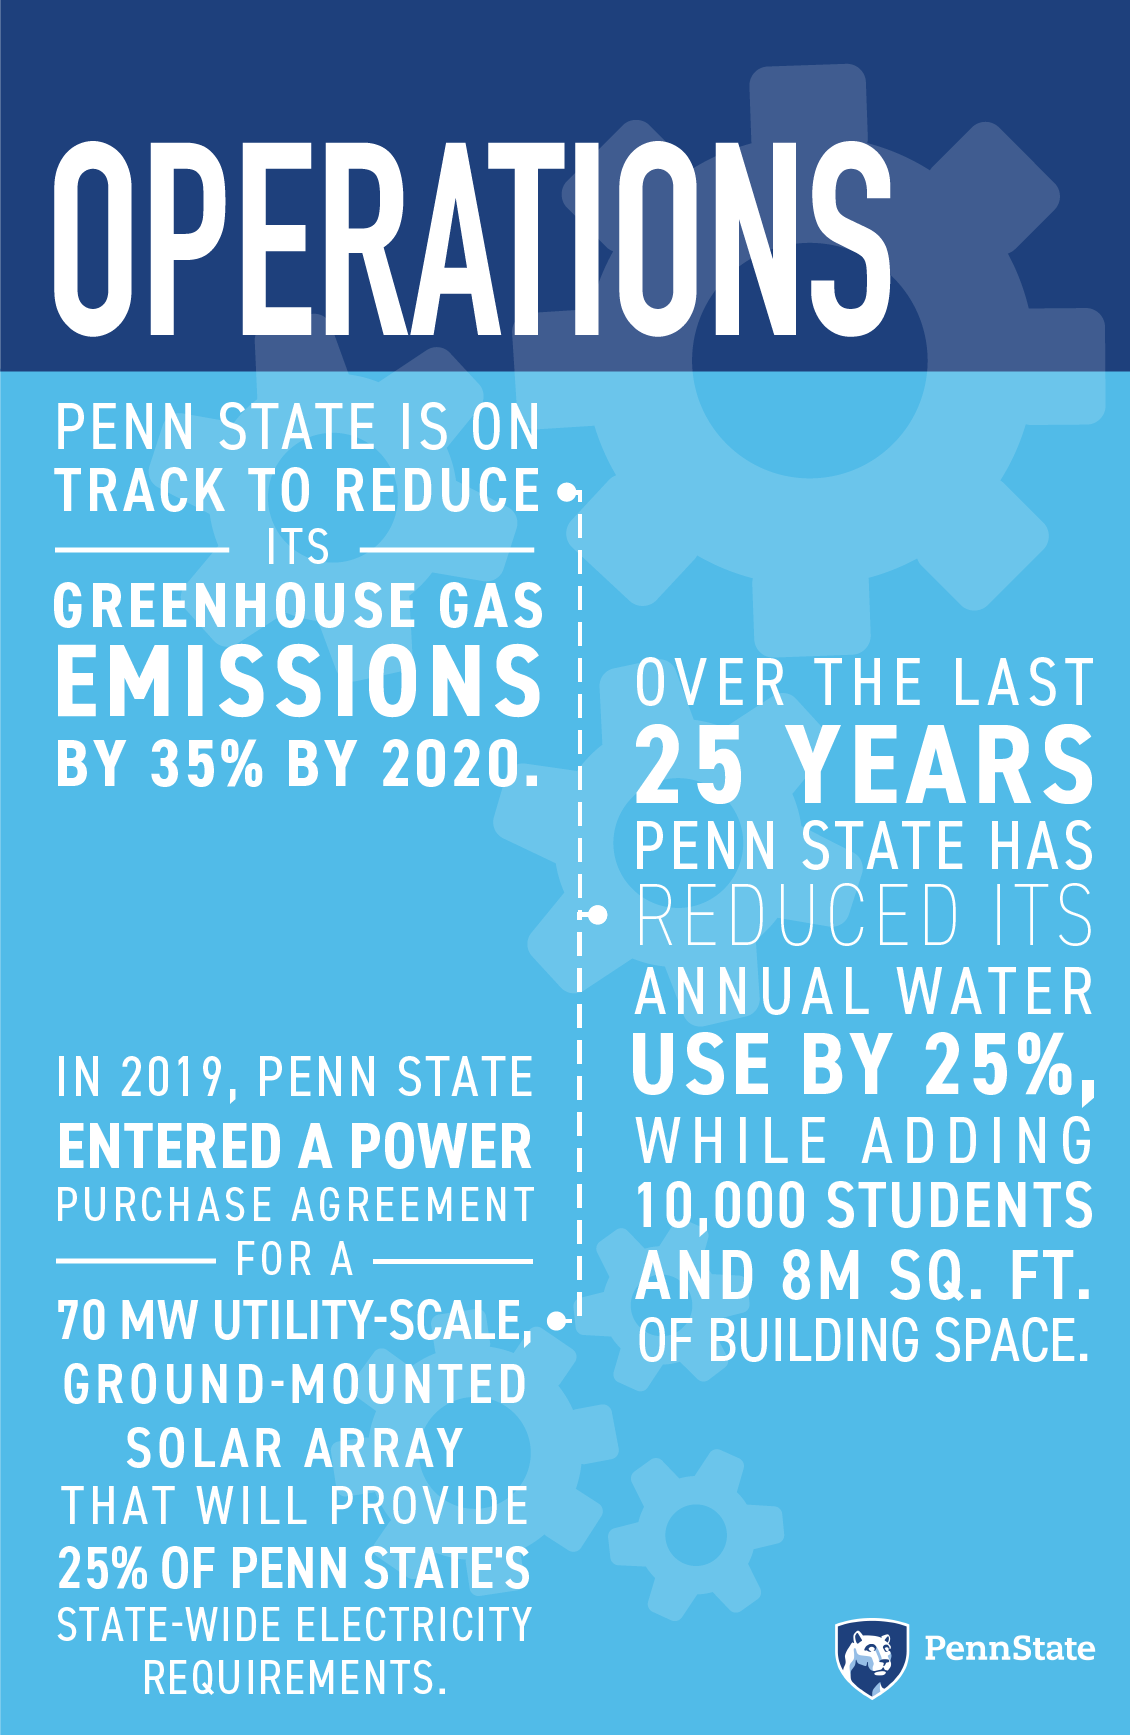 Penn State is on track to reduce its greenhouse gas emissions by 35% by 2020. Over the last 25 years Penn State has reduced its annual water use by 25%, while adding 10,000 students and 8M sq. ft. of building space. In 2019, Penn State entered a power purchase agreement for a 70 MW utility-scale, ground-mounted solar array that will provide 25% of Penn State's state-wide electricity requirements.